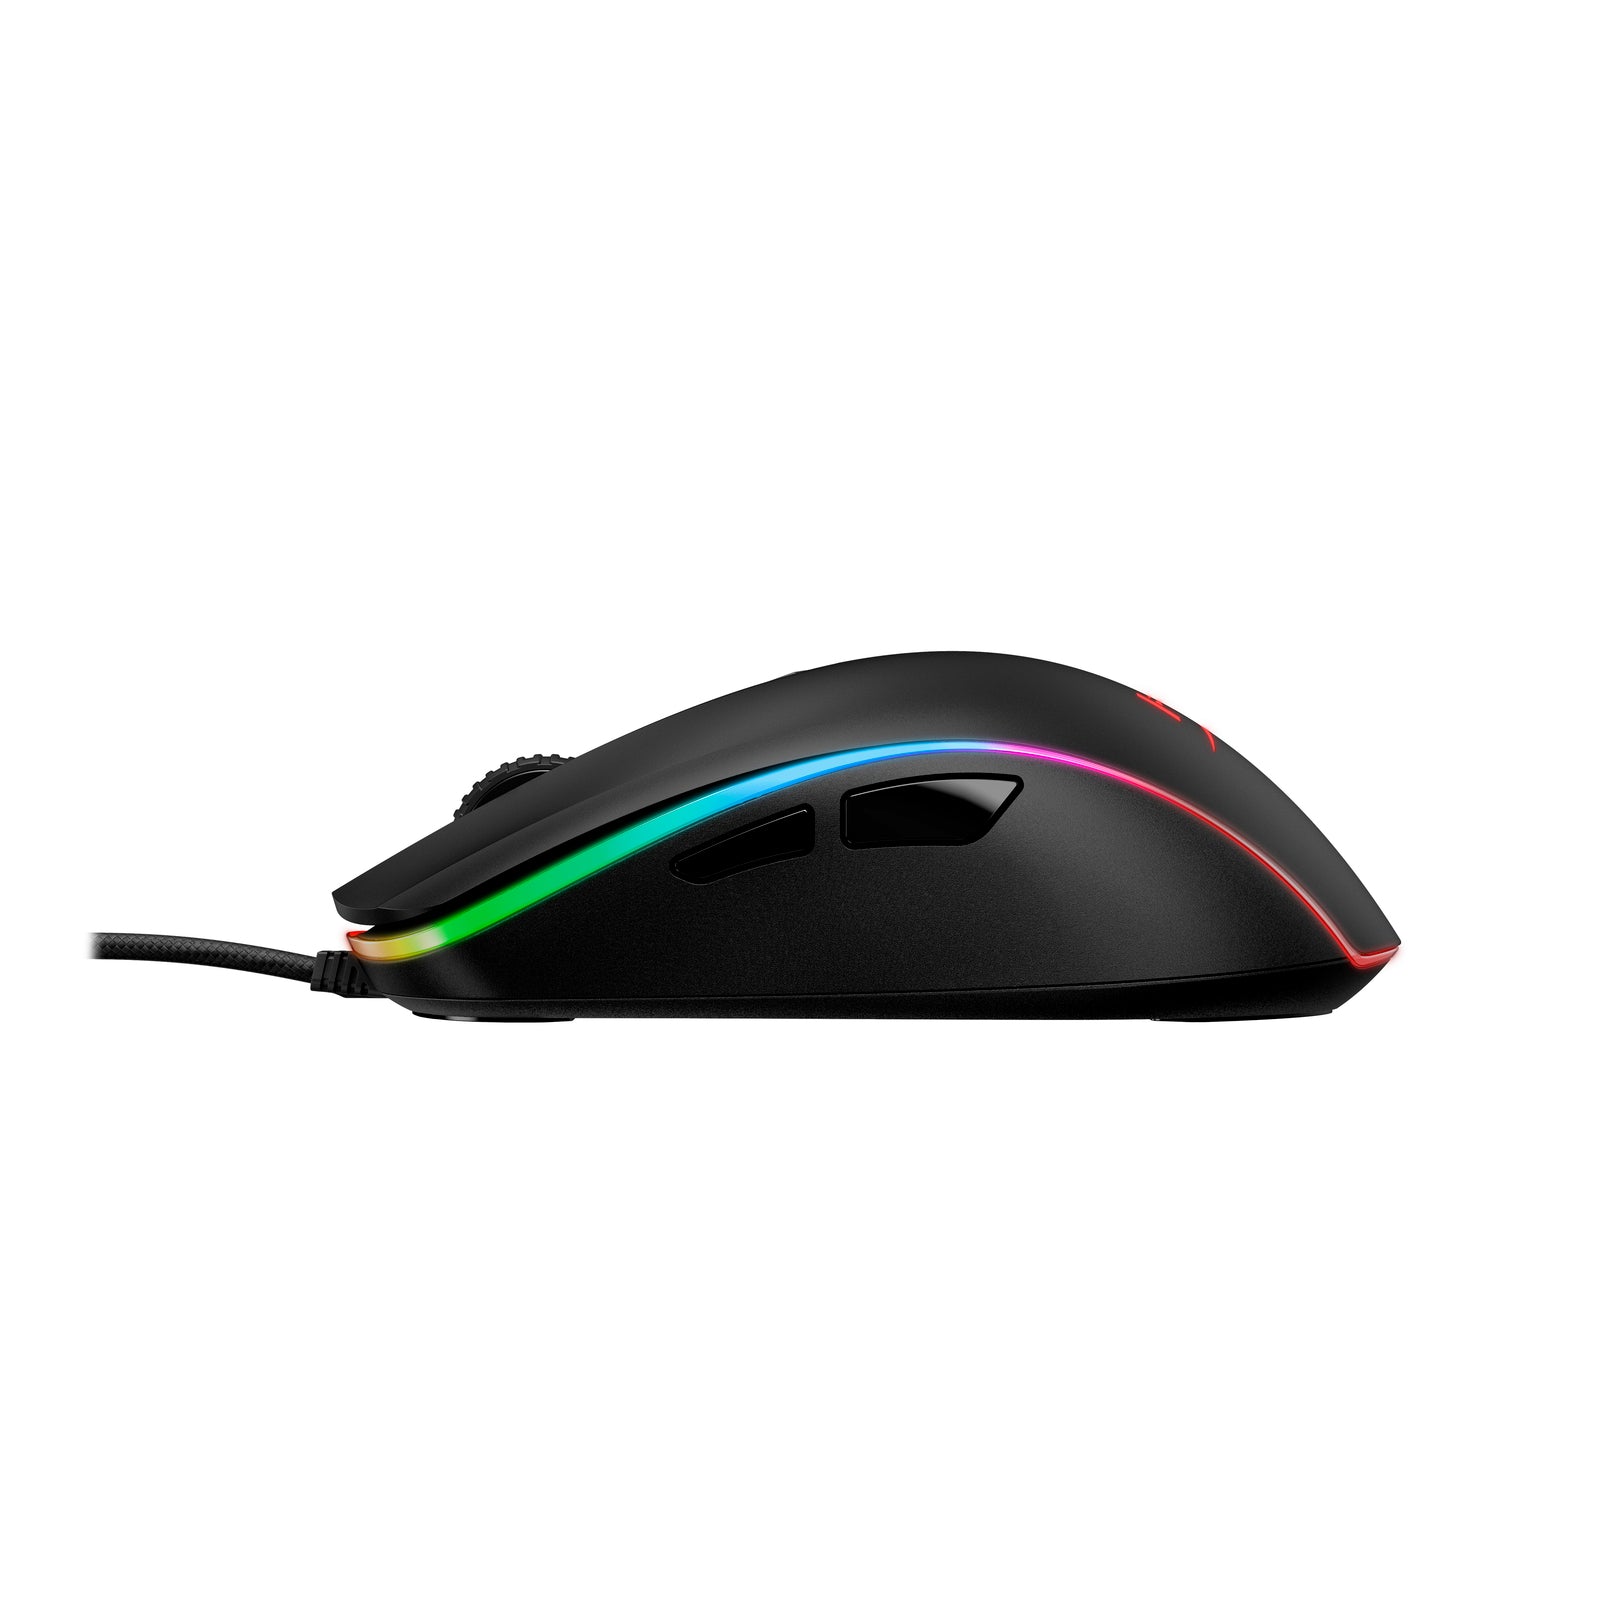 Pulsefire Surge – RGB Gaming Mouse | HyperX